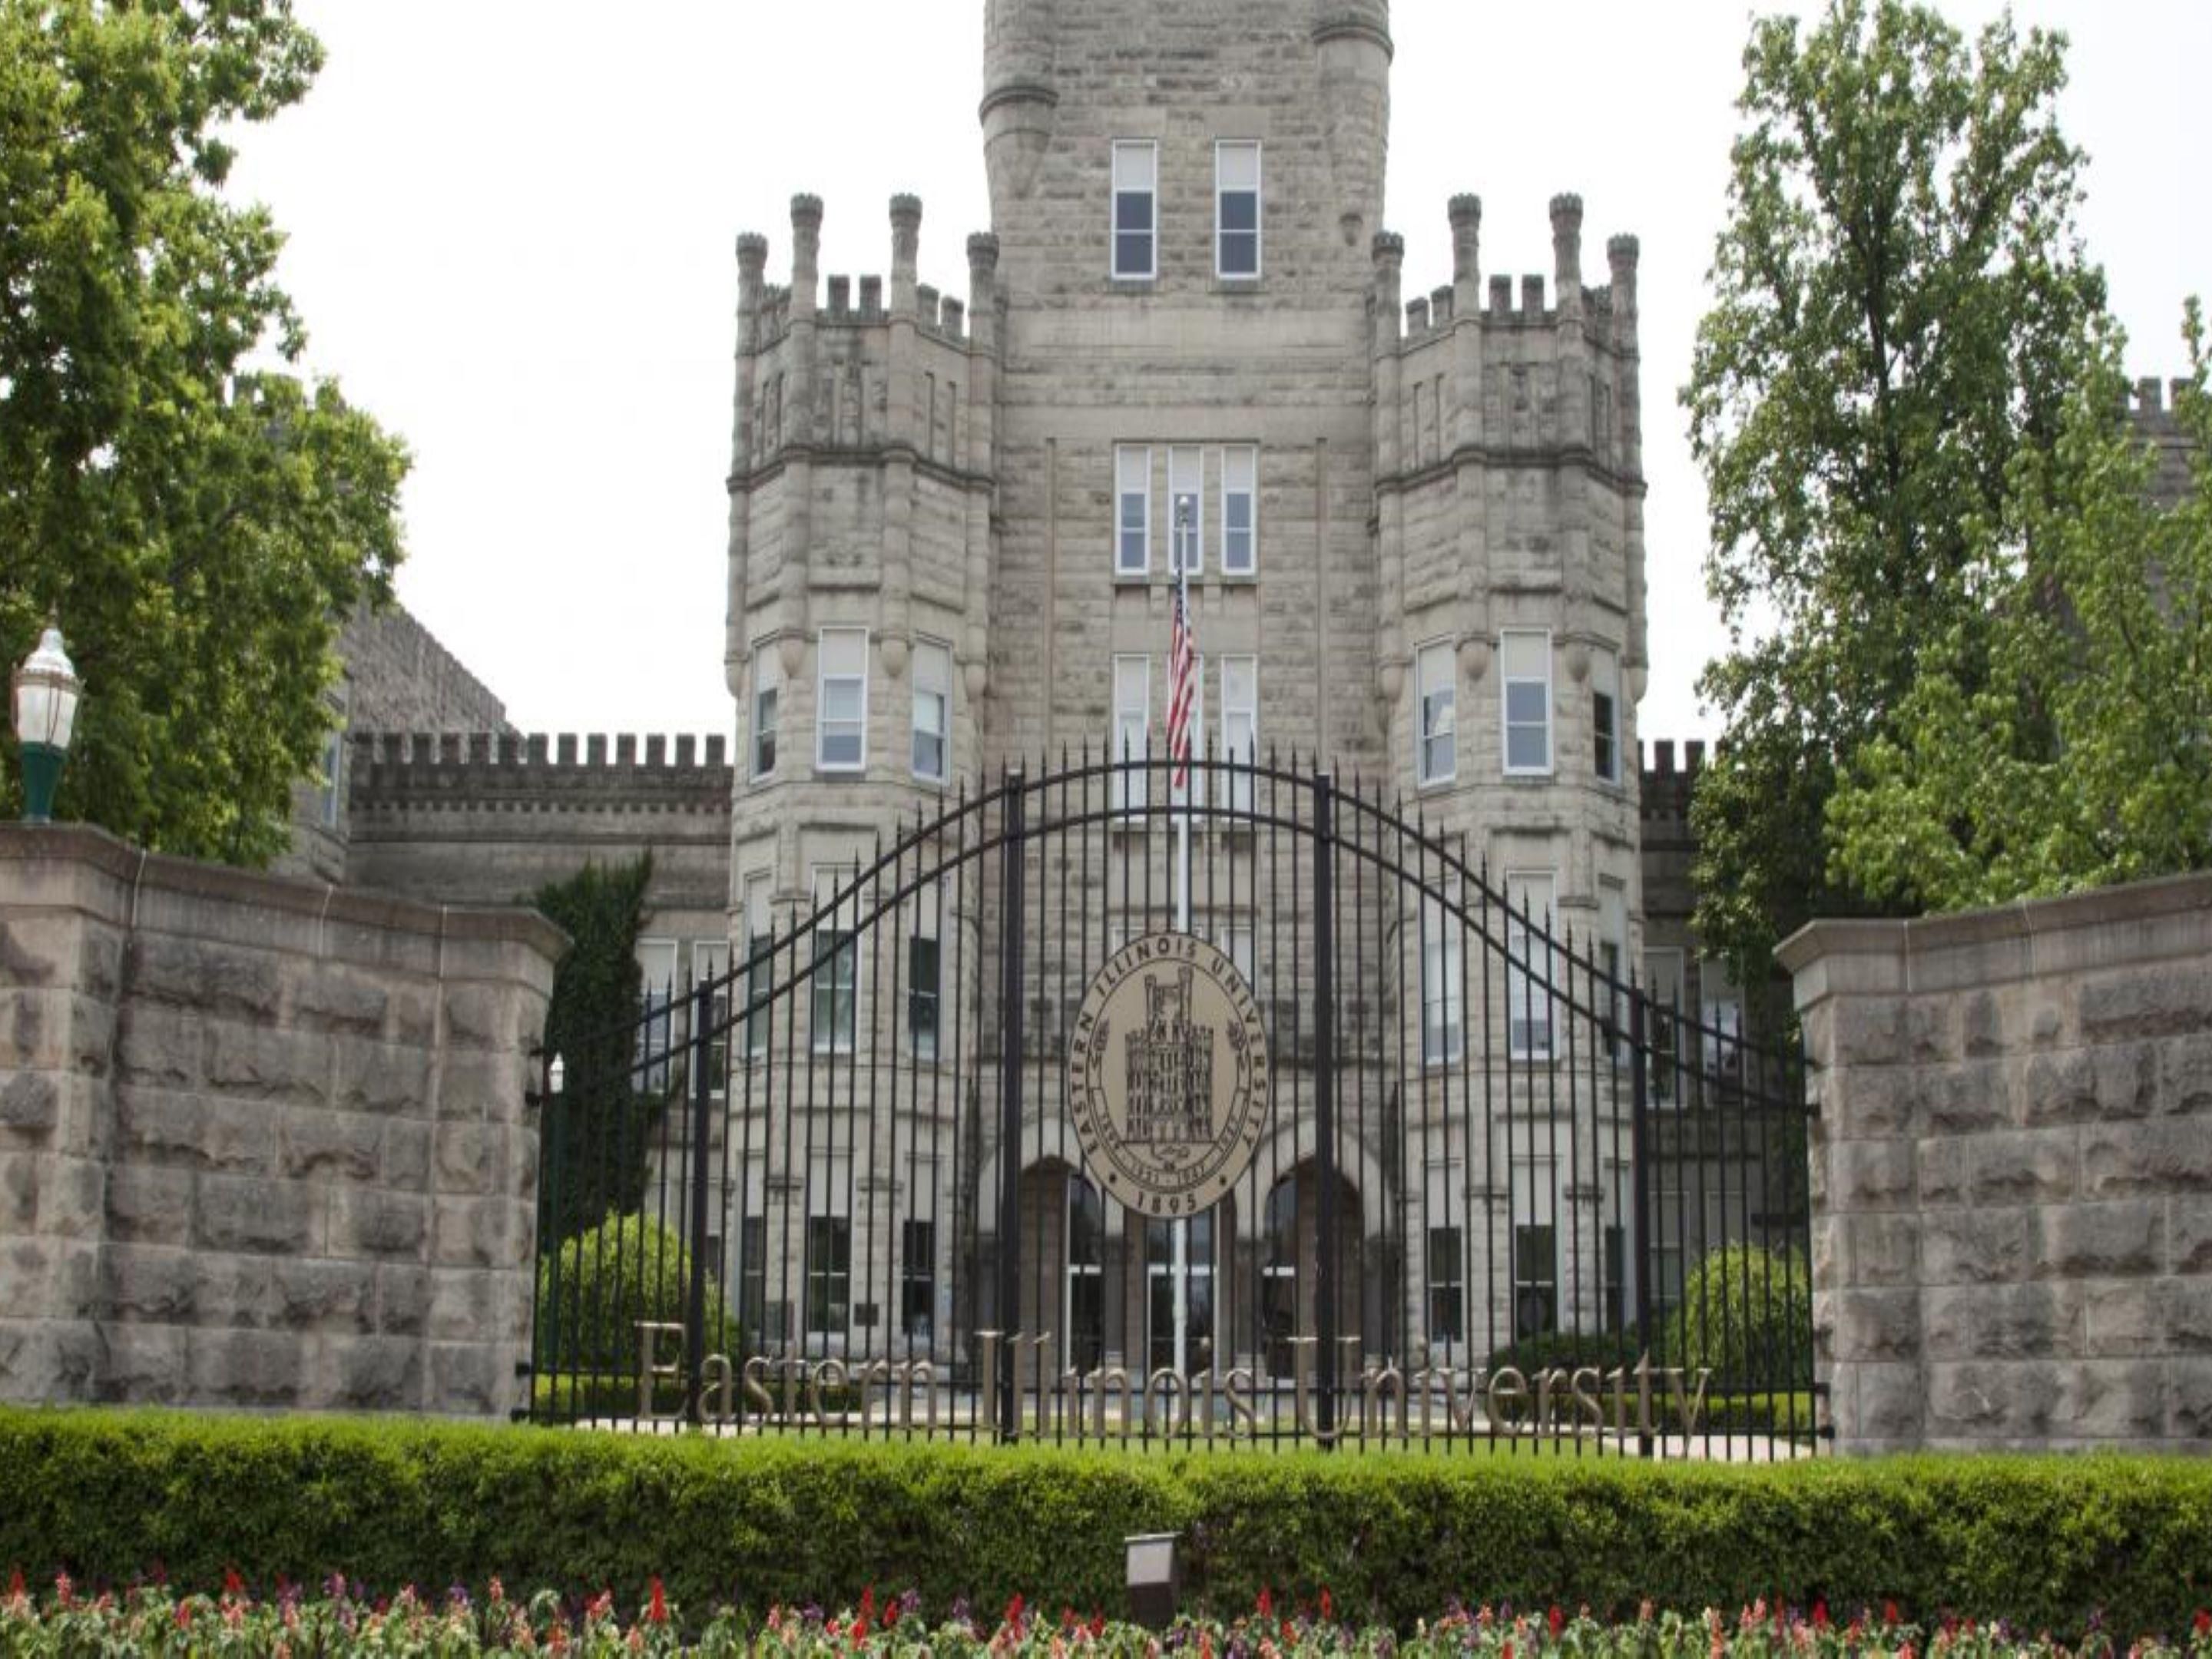 Eastern Illinois University in Charleston IL, located just 45 minutes northeast of Effingham, IL, is a 4 year university that hosts many festivals, concerts and sporting events throughout the year.  EIU is the alma mater of Burl Ives and Dallas Cowboys quarterback, Tony Romo.